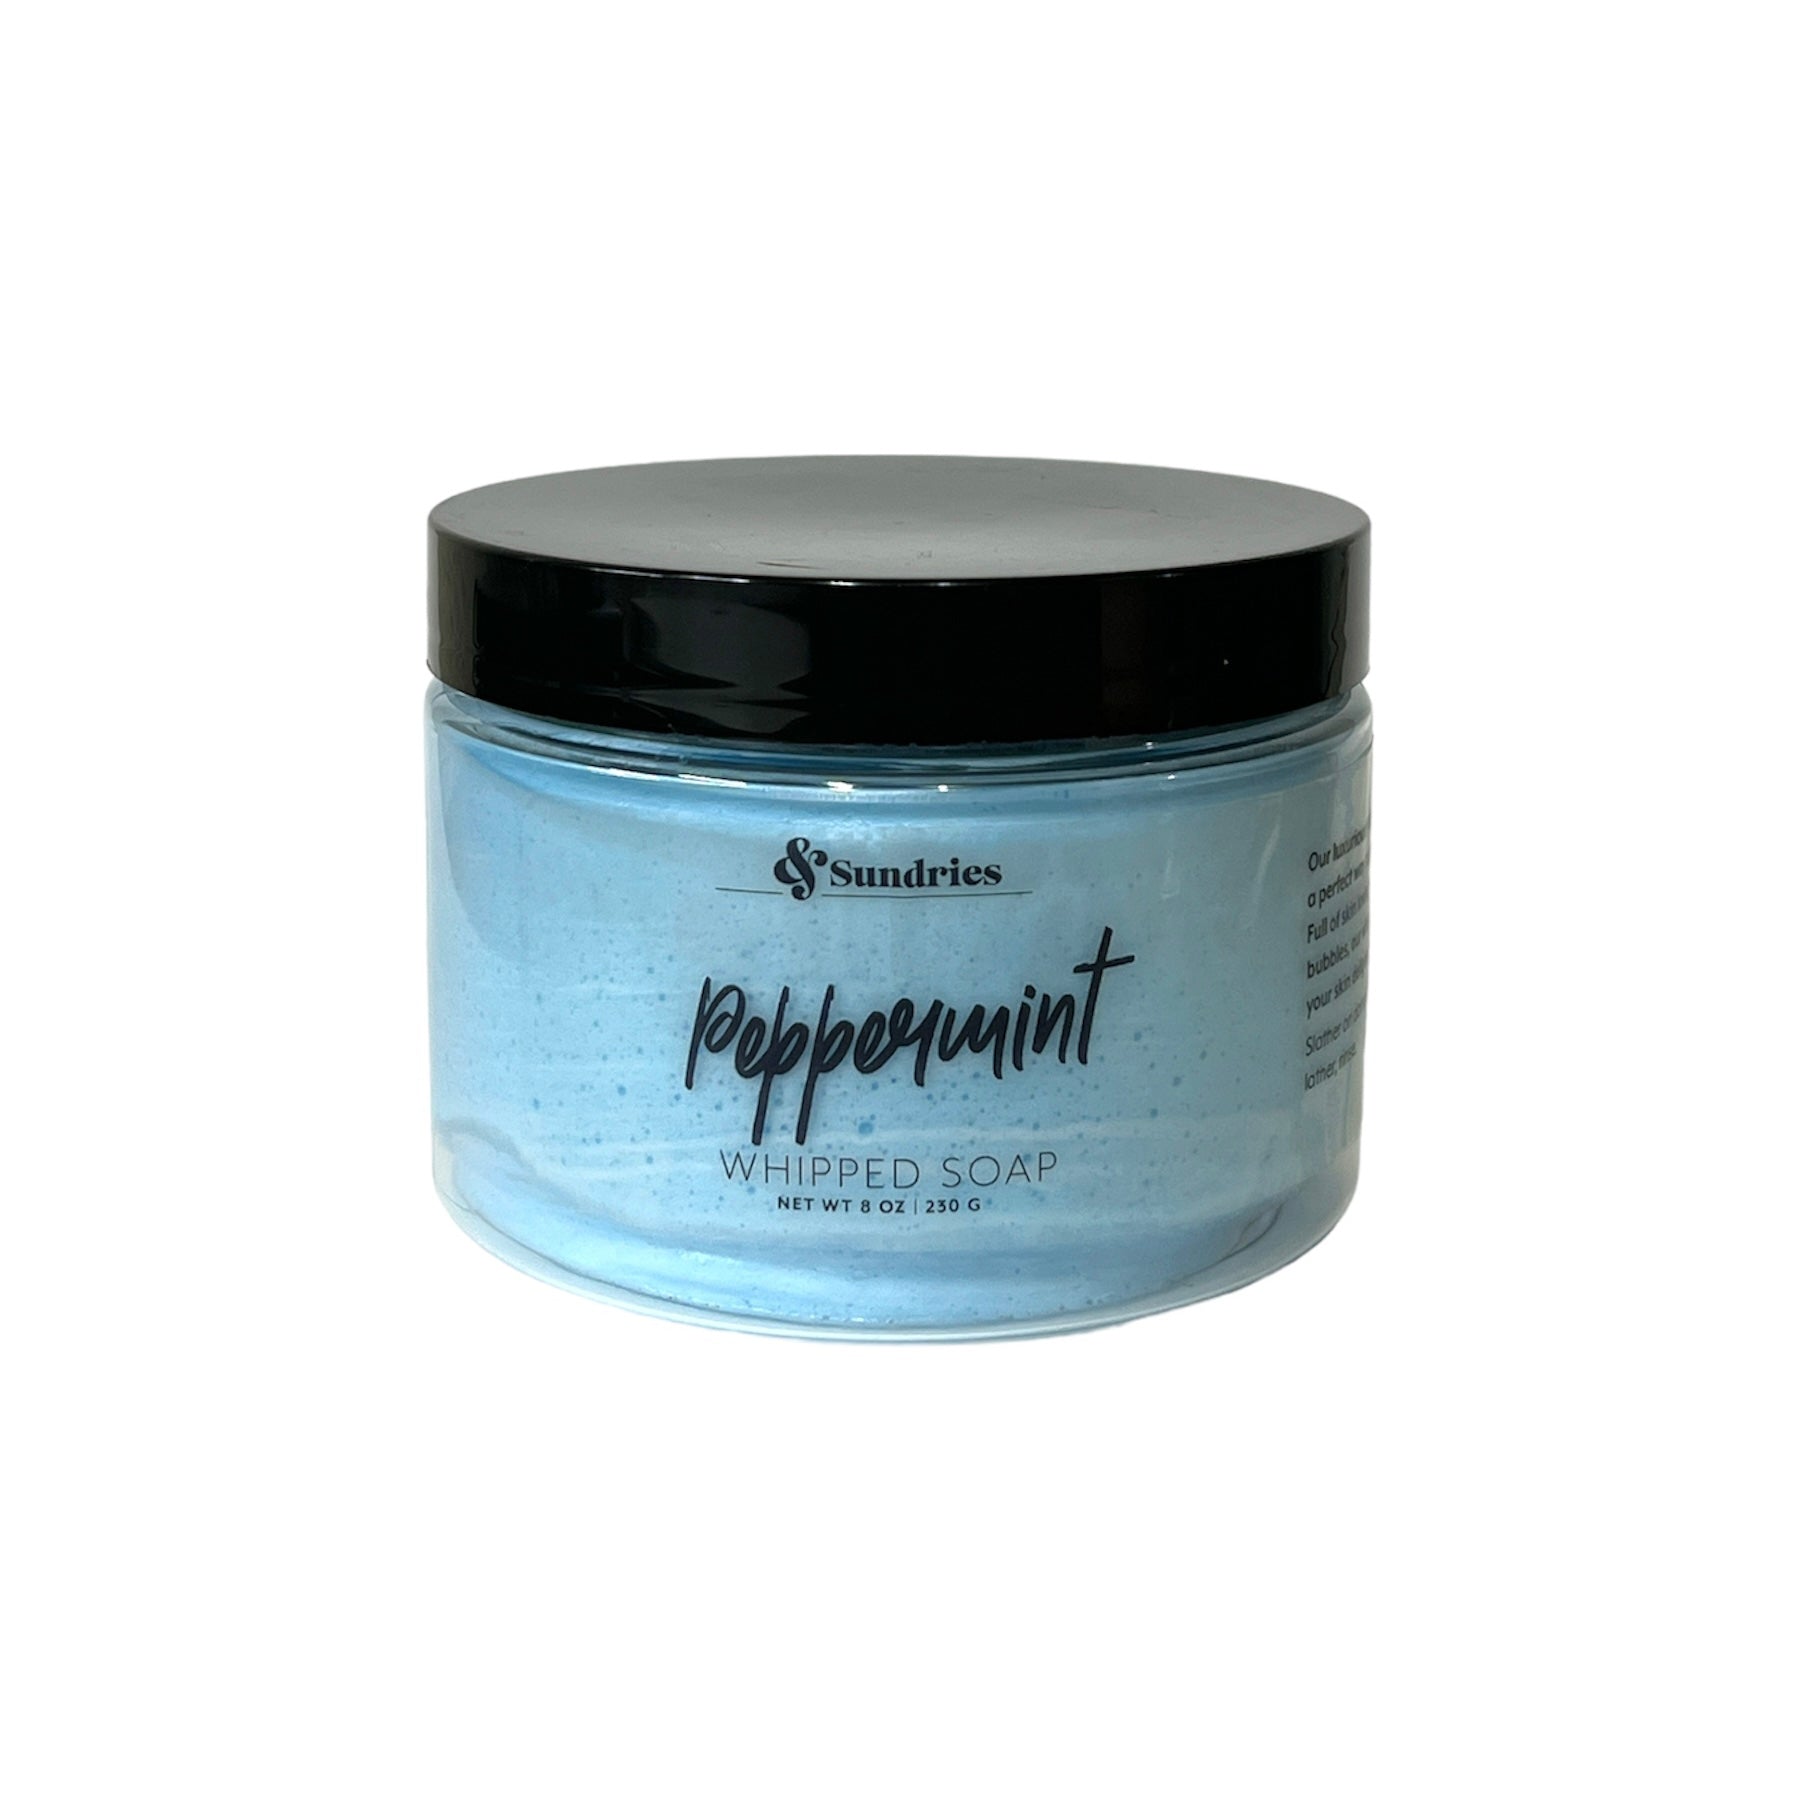 Peppermint Whipped Soap